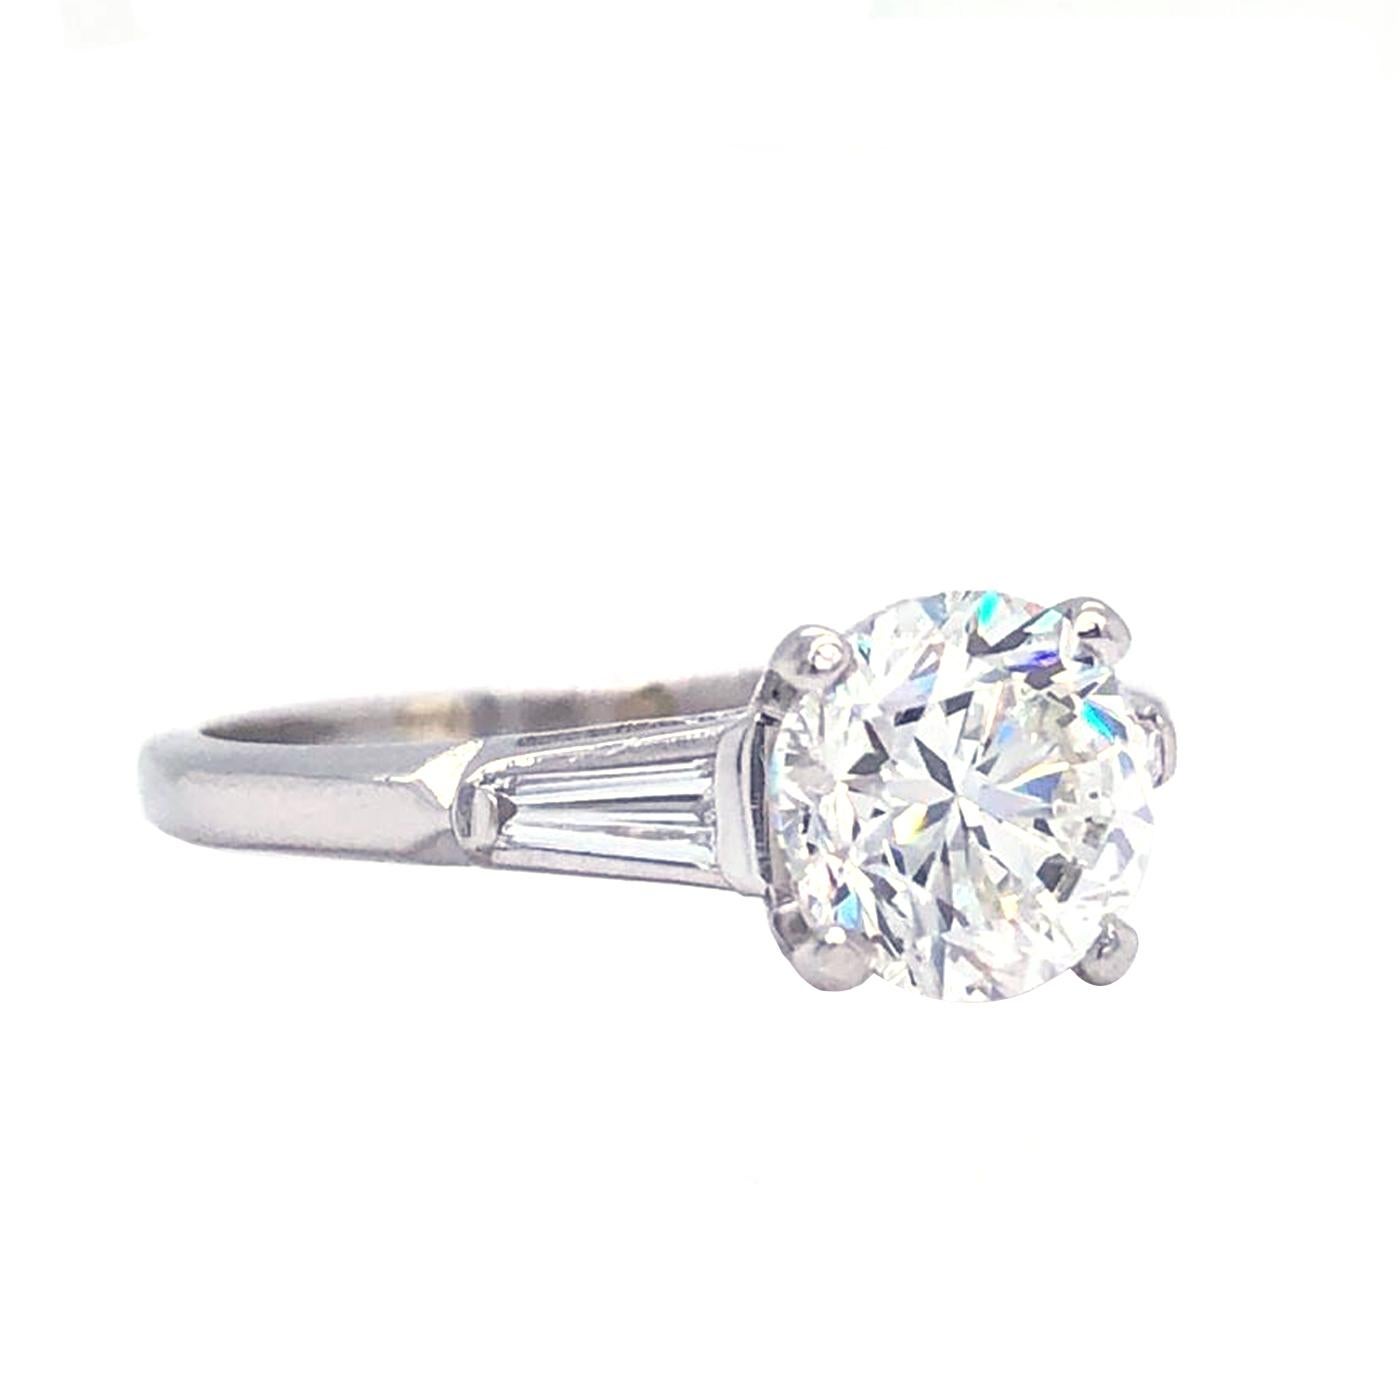 Classic Platinum Diamond ring 2.00 Carat center Round Brilliant Certified by Gia as I - Color, Si2  Clarity, and accented by two tapered baguette-cut diamonds, Totaling 0.35 carat H color, VS1 - Clarity, The ring weighs 3.2 grams, and is currently